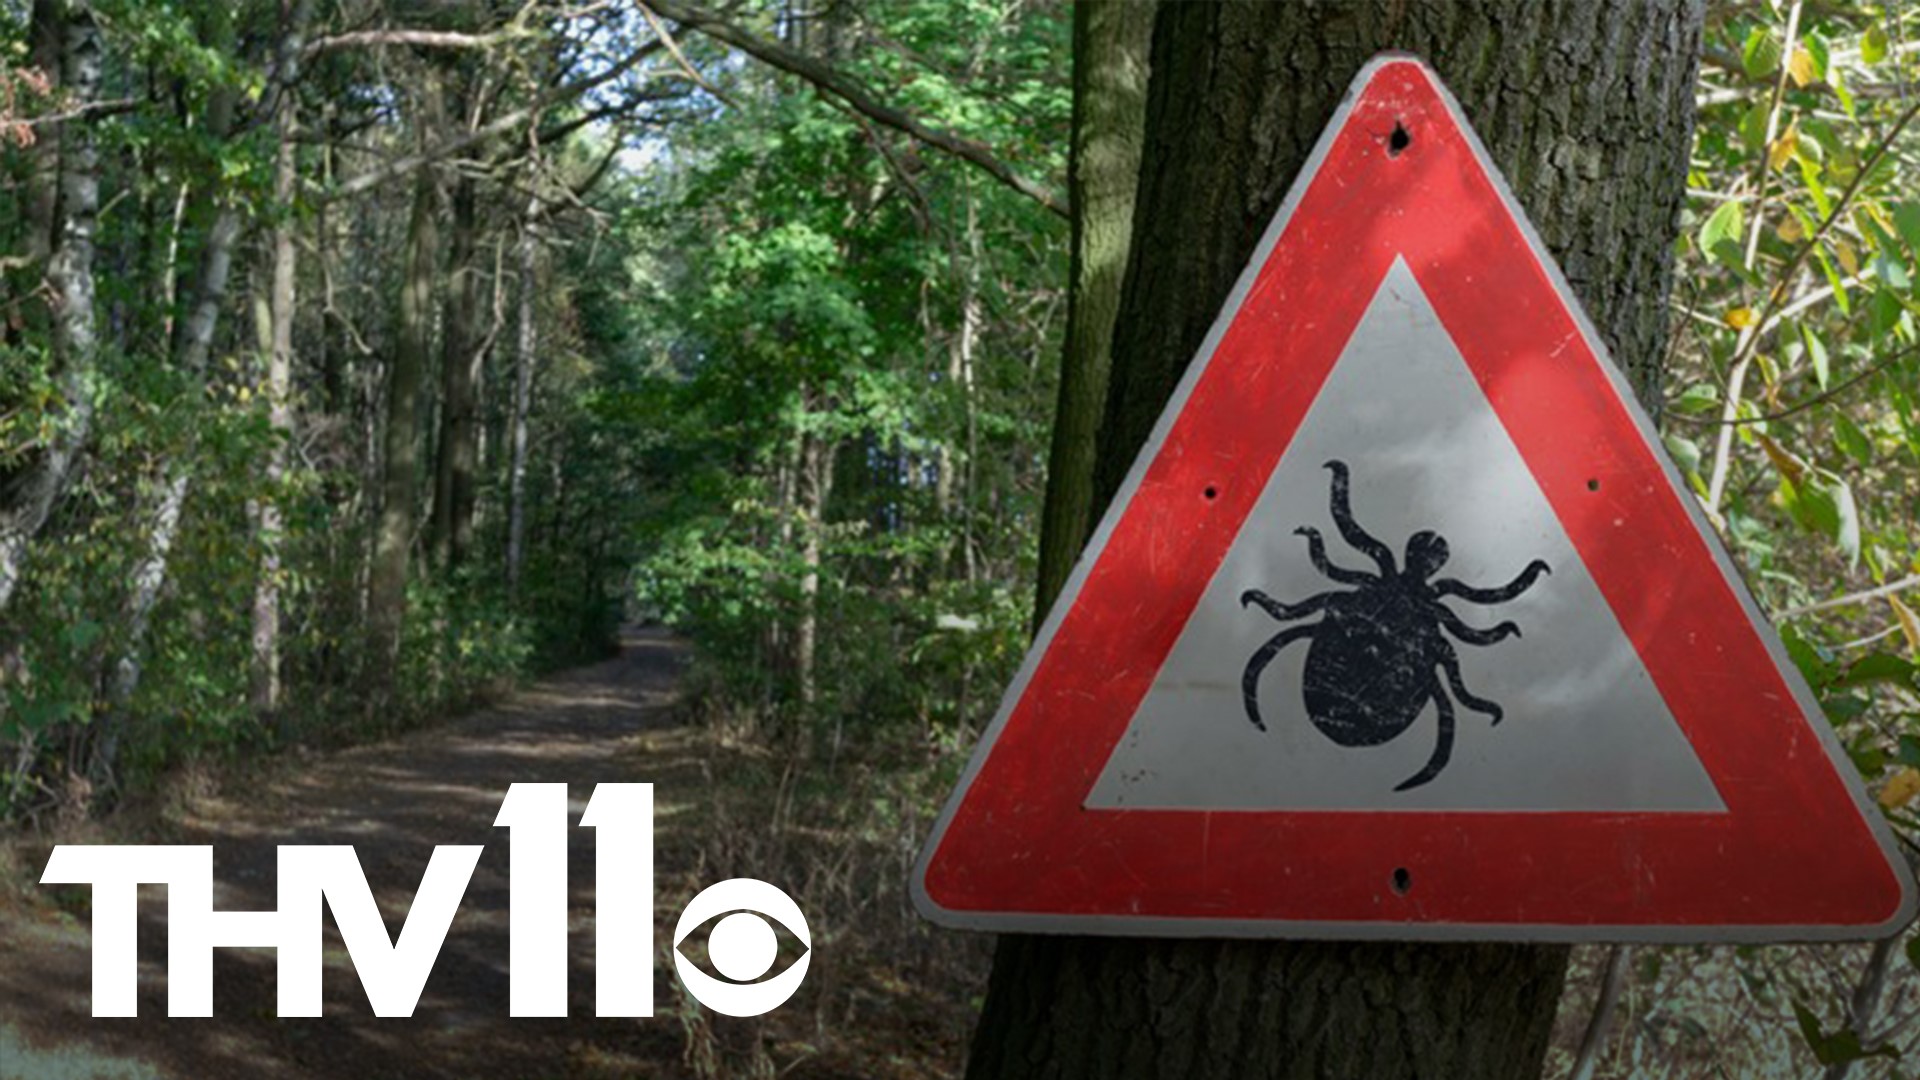 Some people in Arkansas are noticing more ticks on themselves and their pets.